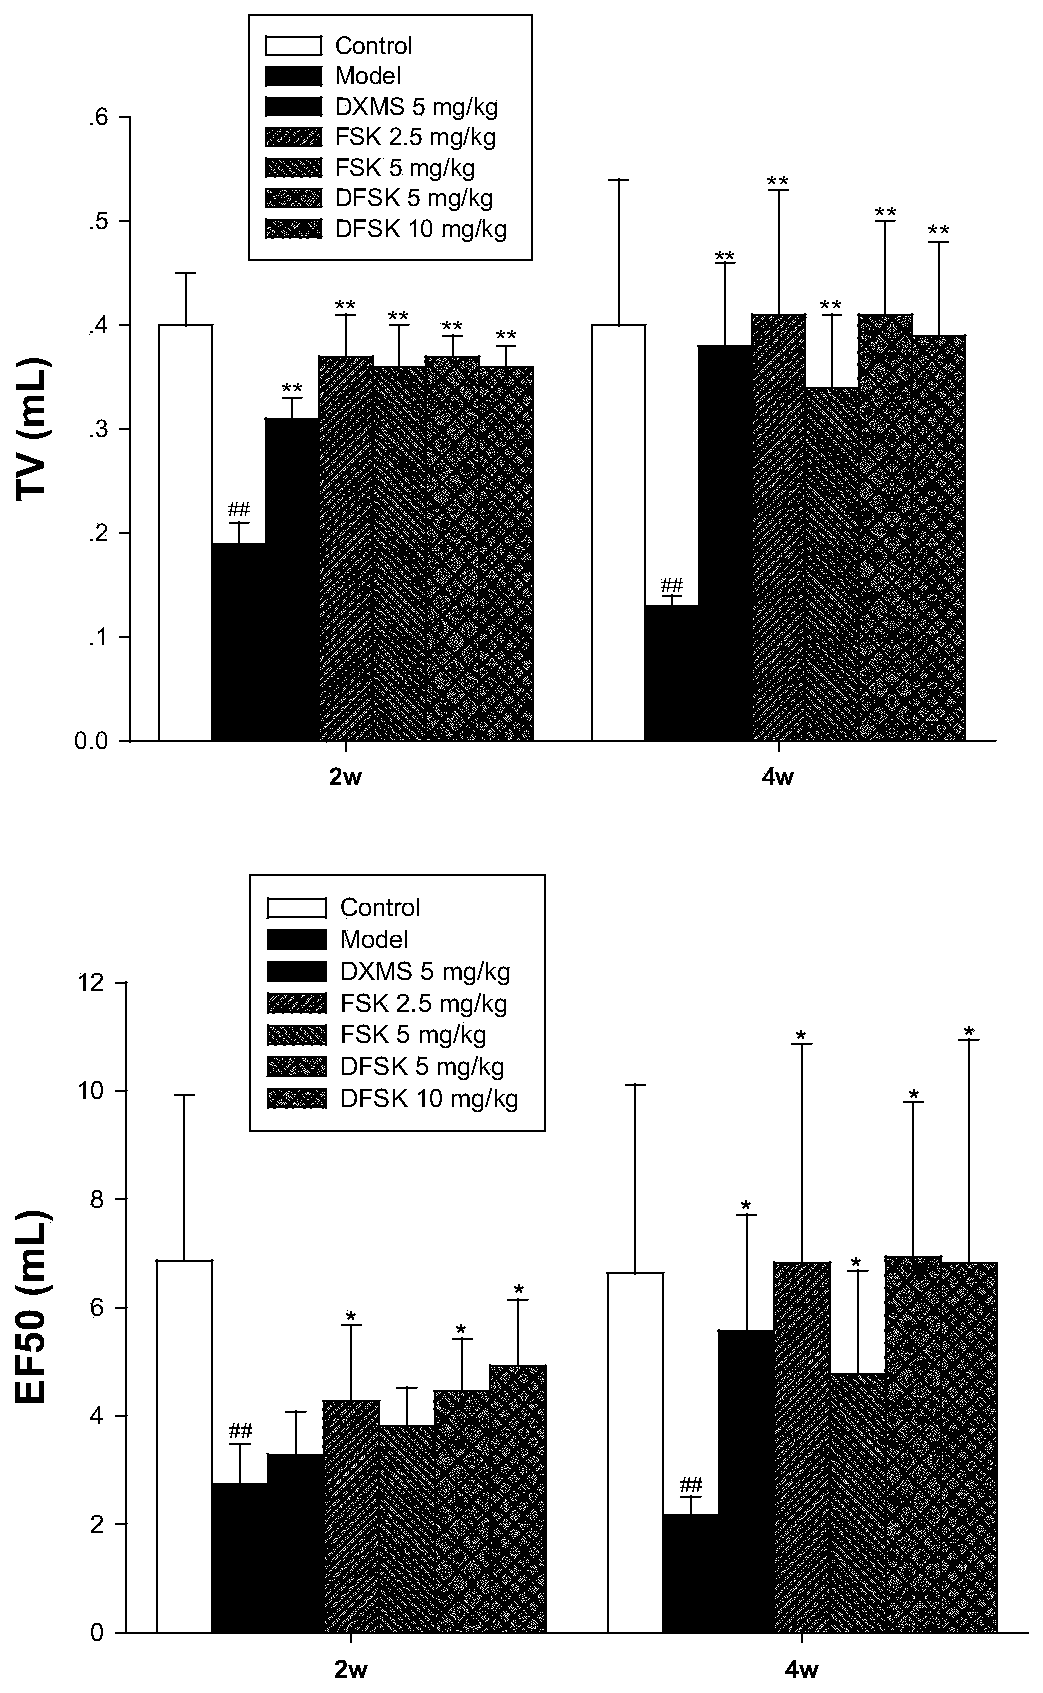 Application of forskolin and derivatives thereof in preparing anti-pulmonary fibrosis drug